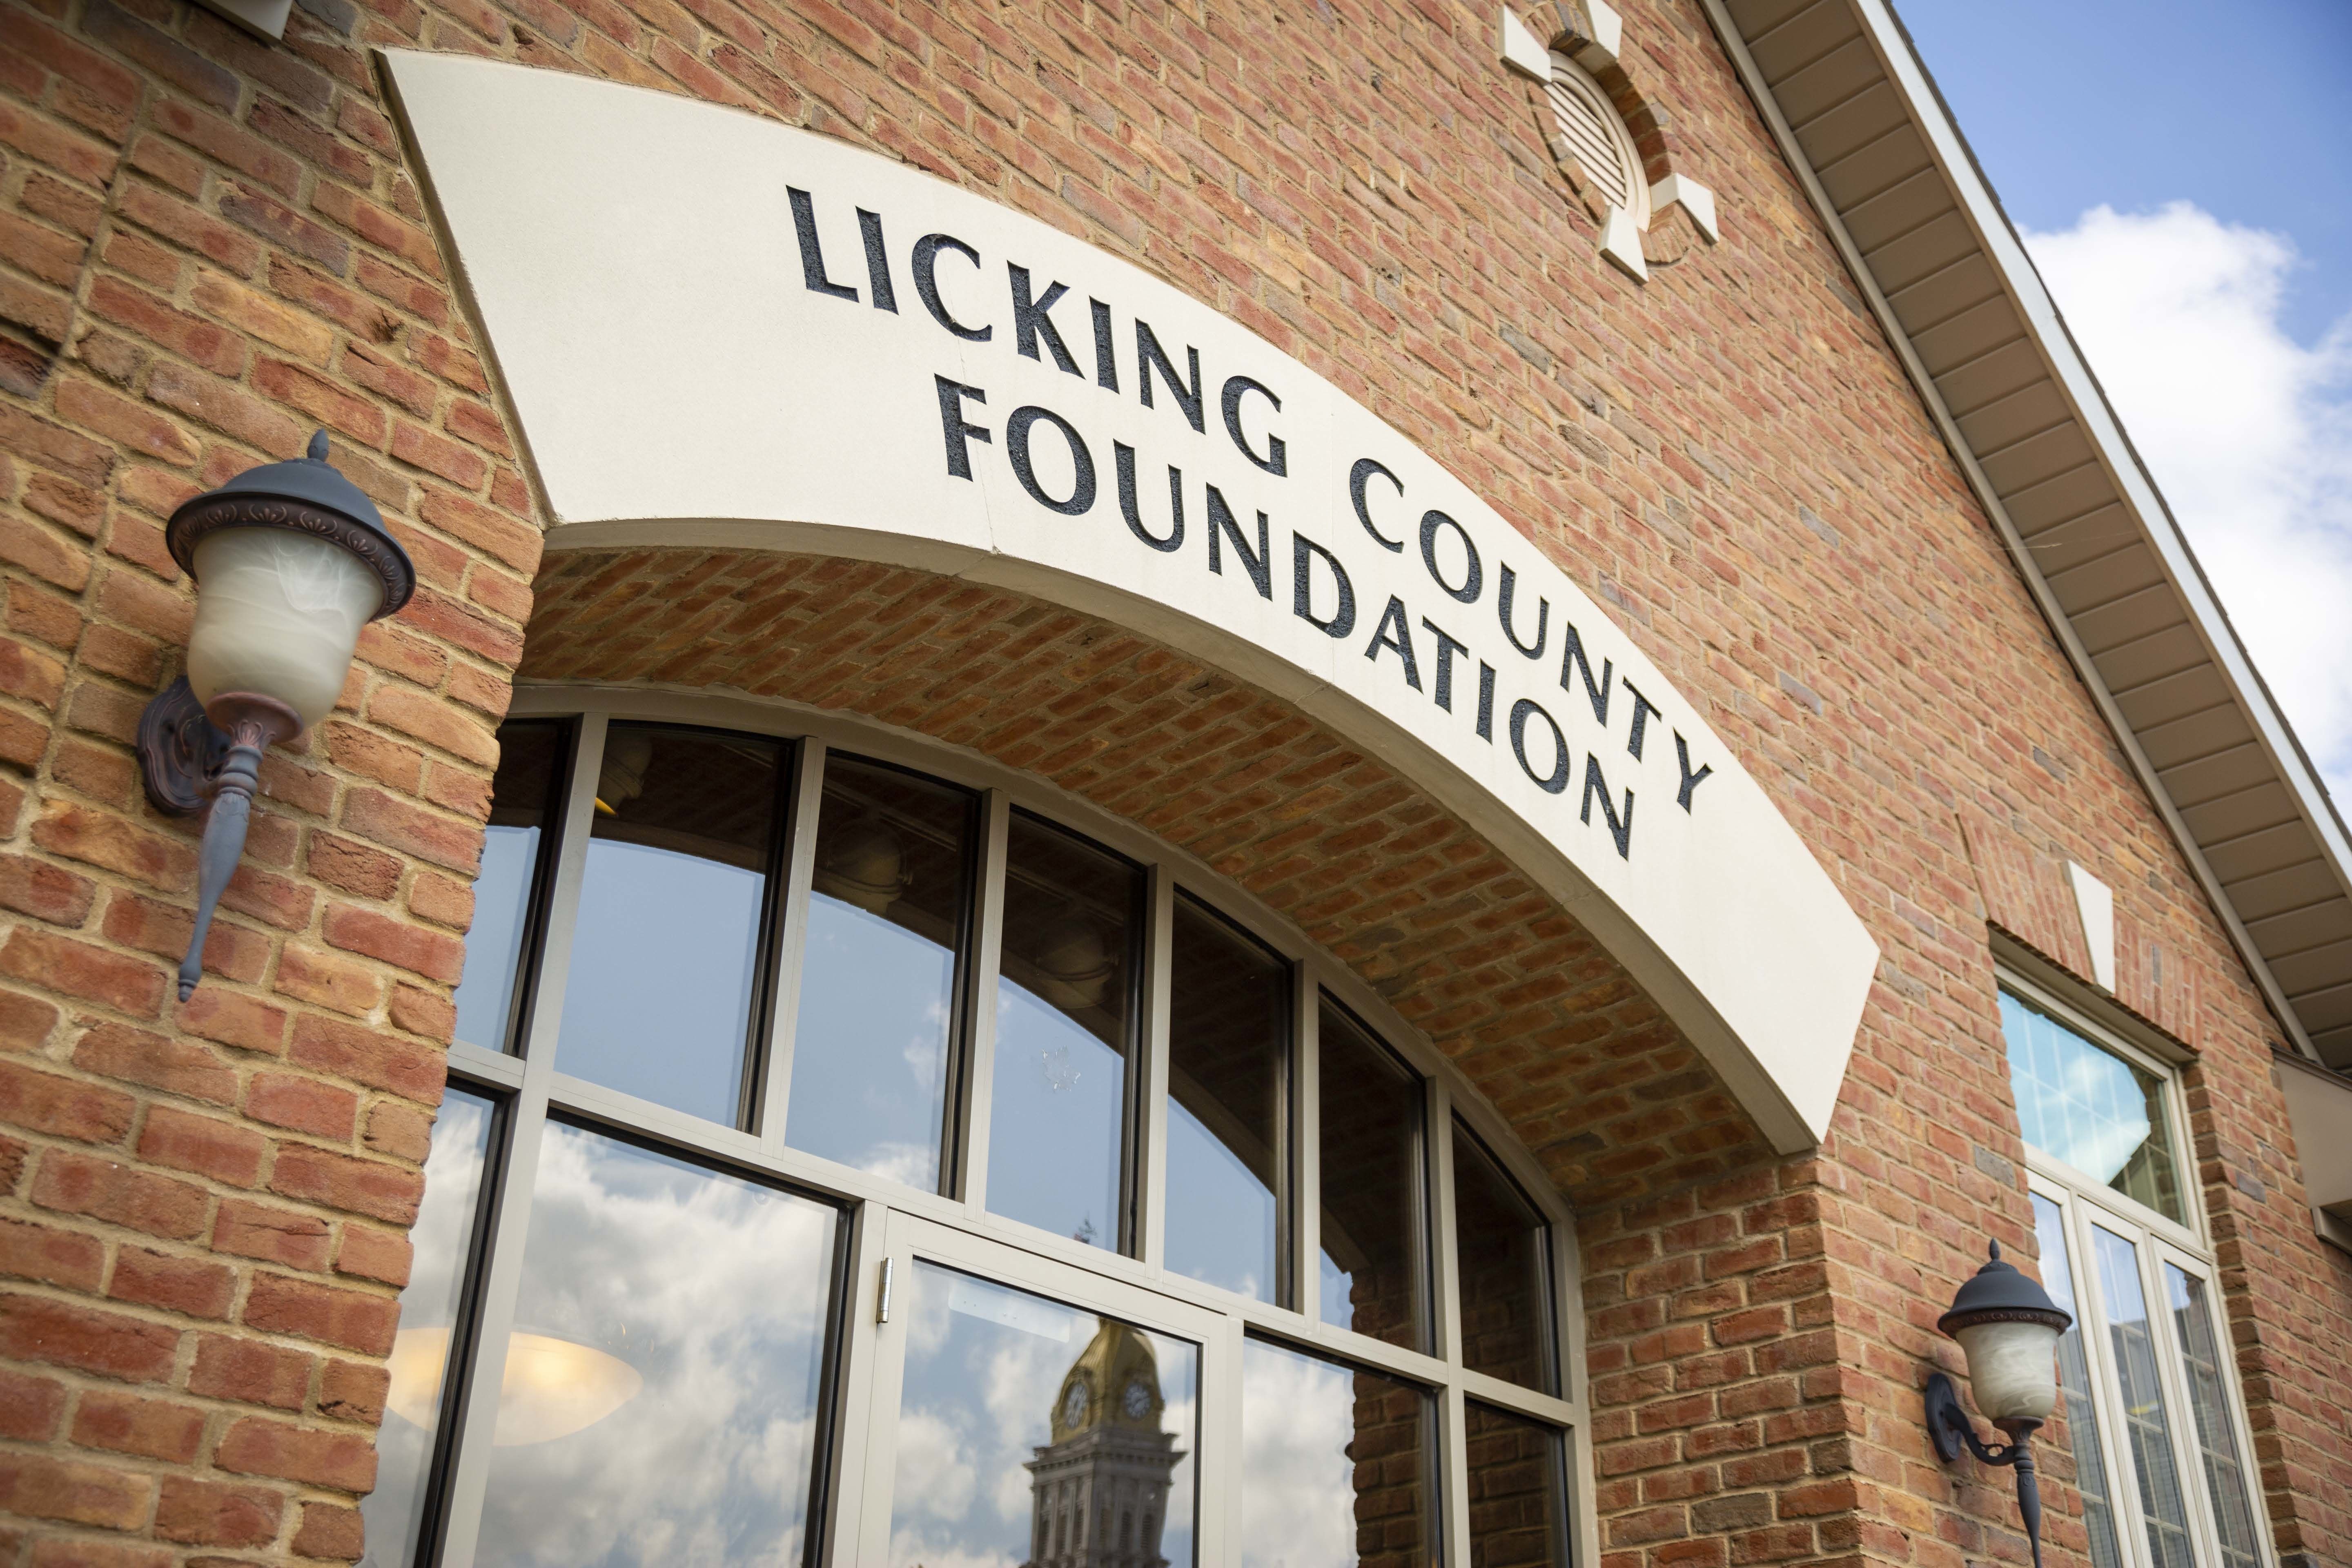 Marking 65th anniversary, Licking organization asks how to improve Licking County